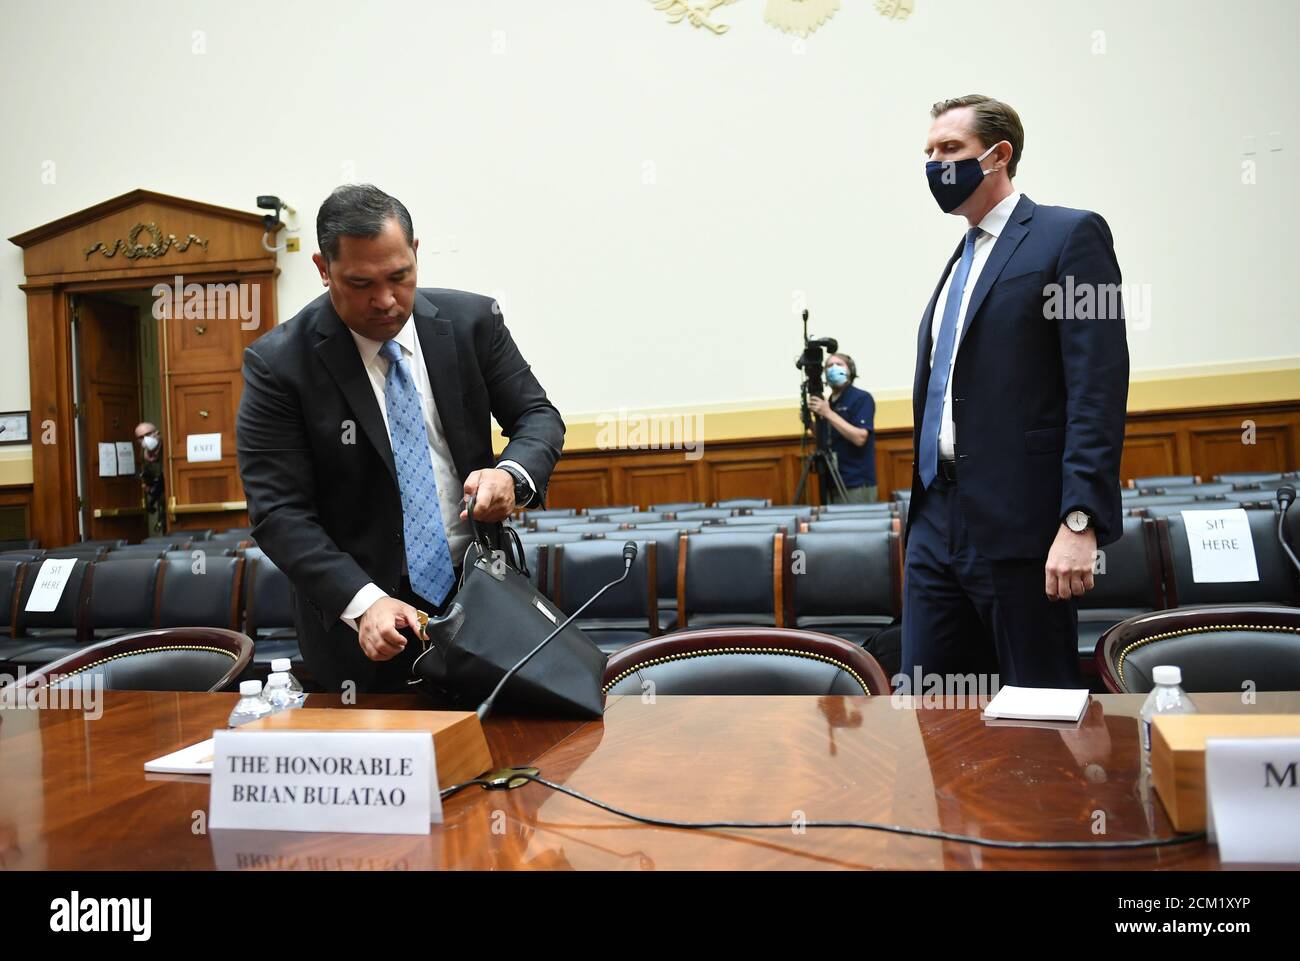 Brian Bulatao (L), Under Secretary of State for Management, and Marik String, Acting Legal Adviser for the State Department, pack up after testifying before a House Committee on Foreign Affairs hearing looking into the firing of State Department Inspector General Steven Linick, on Capitol Hill in Washington, D.C. on Wednesday, September 16, 2020.Credit: Kevin Dietsch / Pool via CNP /MediaPunch Stock Photo